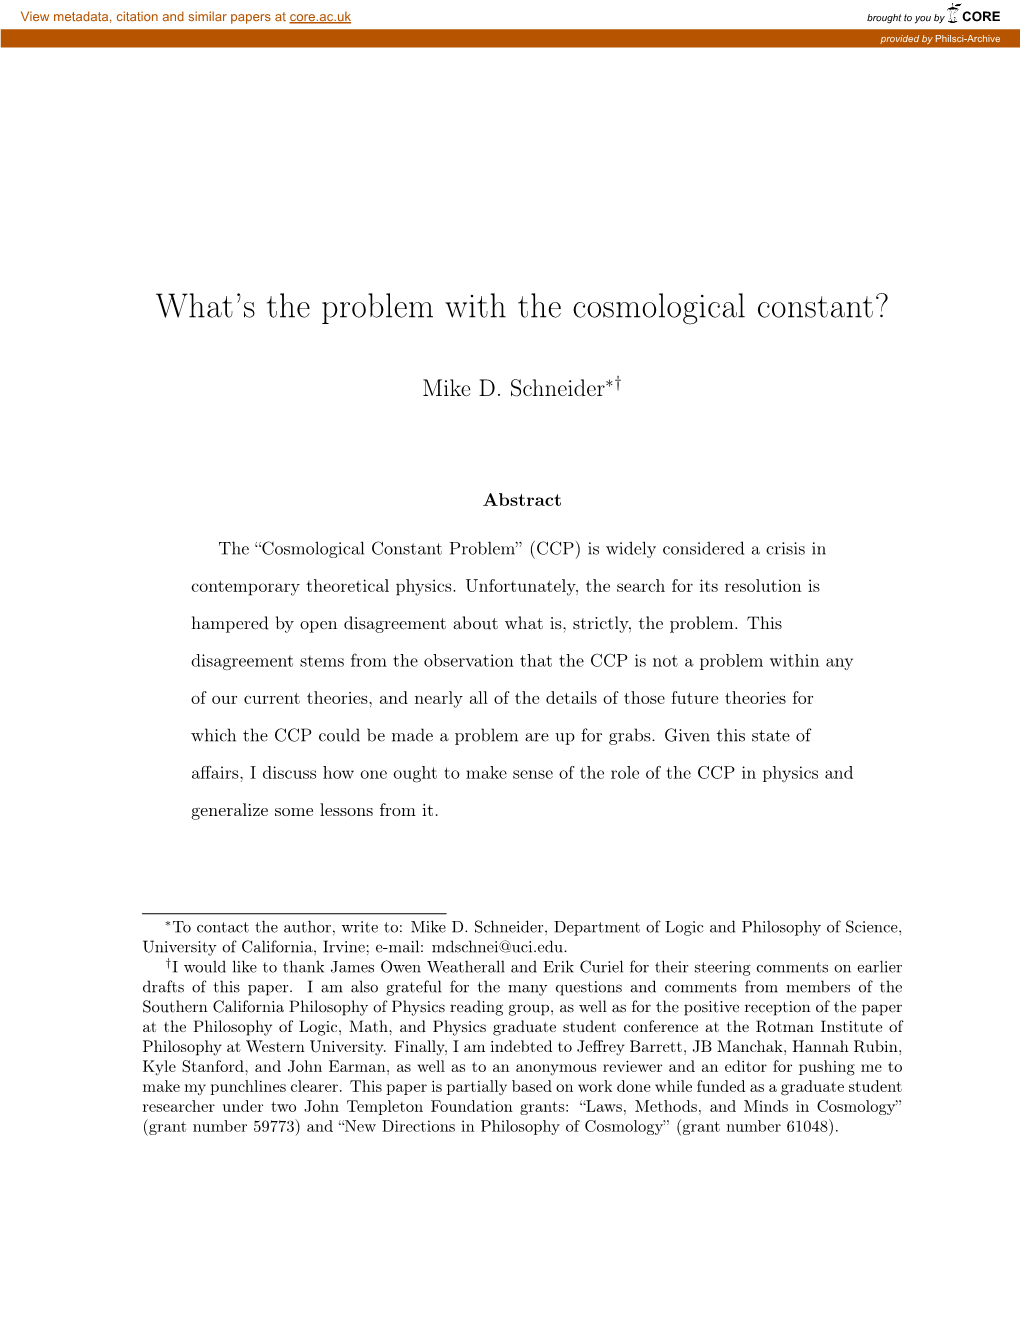 What's the Problem with the Cosmological Constant?